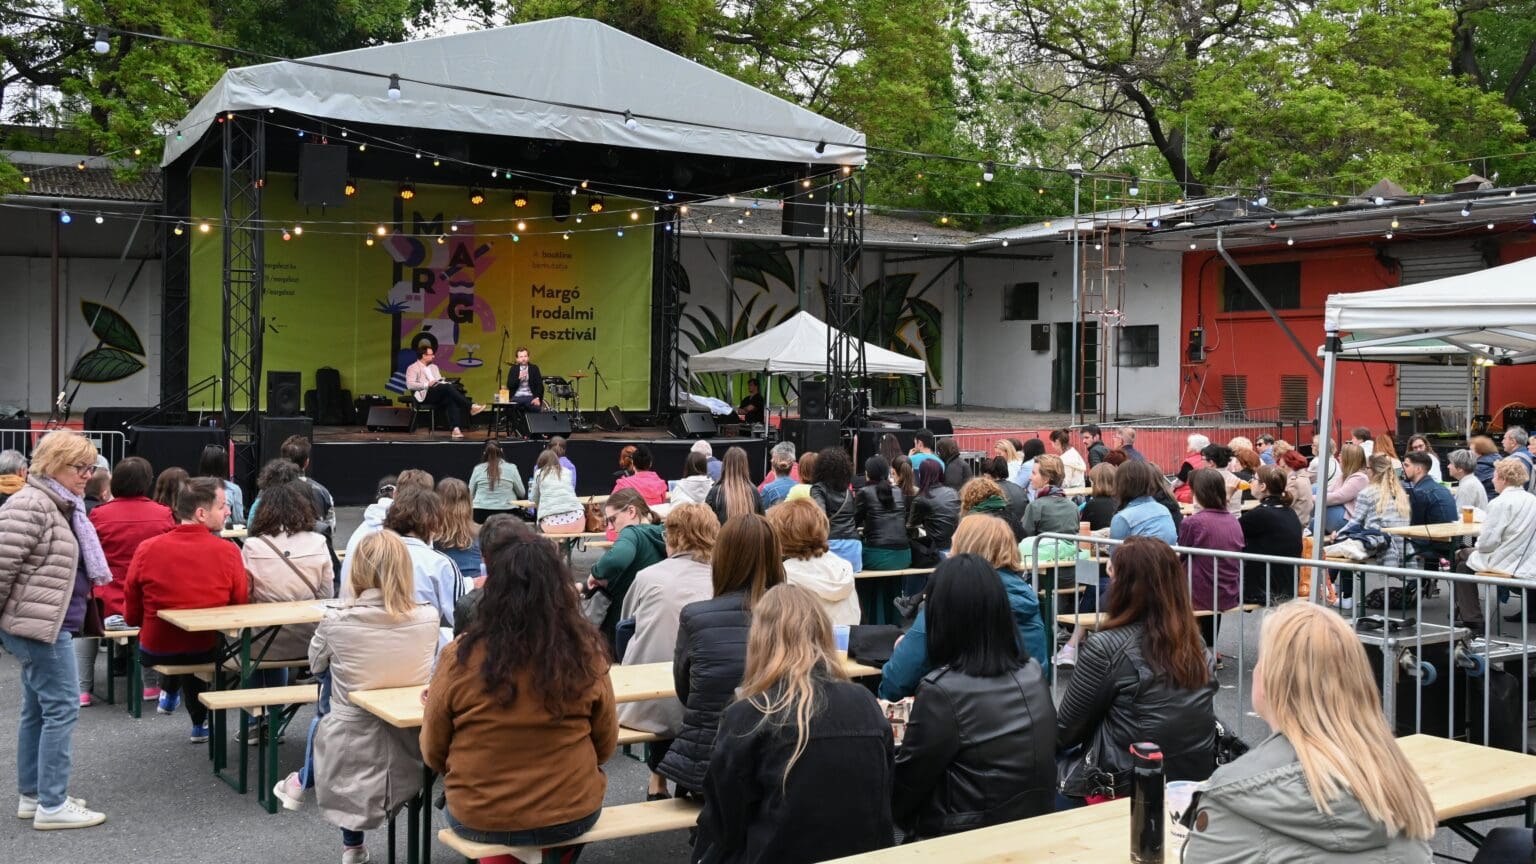 Book Launches and Musical Evenings at Spring Margó Literary Festival